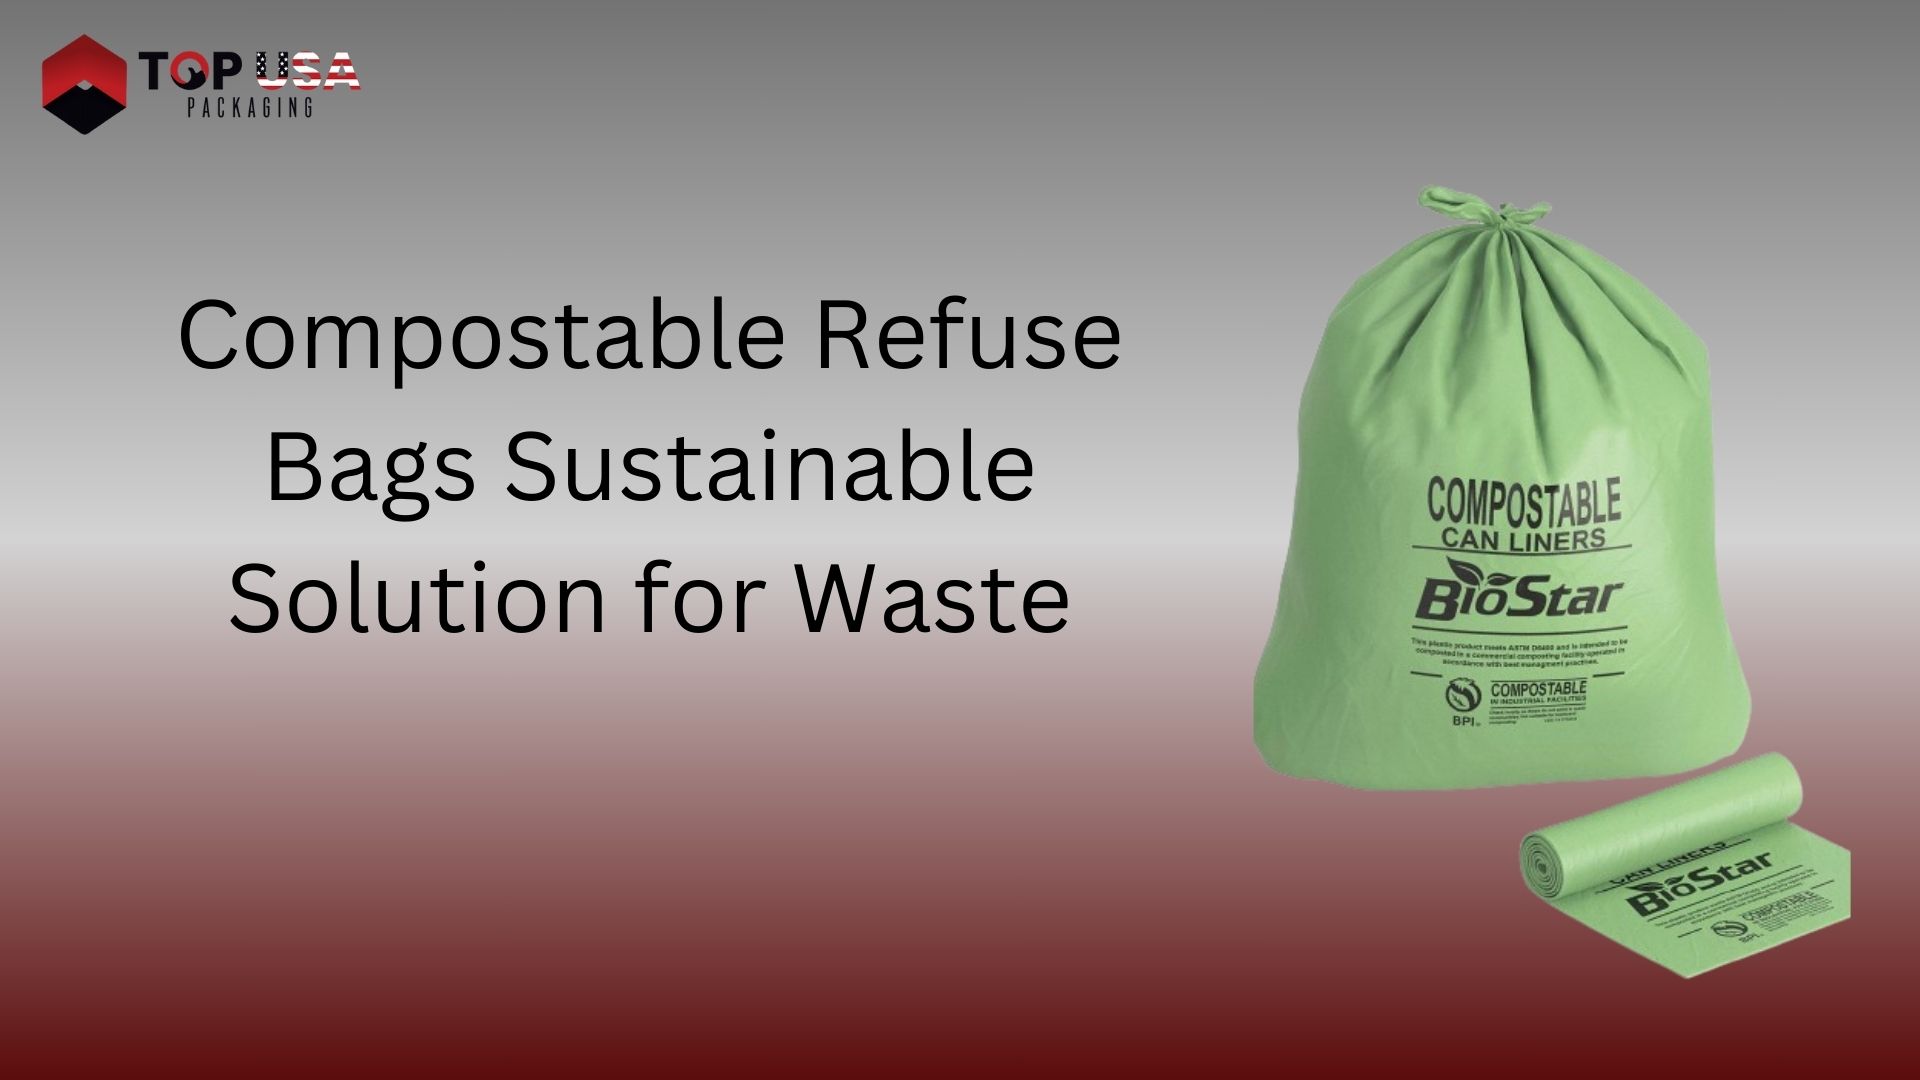 Compostable Refuse Bags Sustainable Solution for Waste